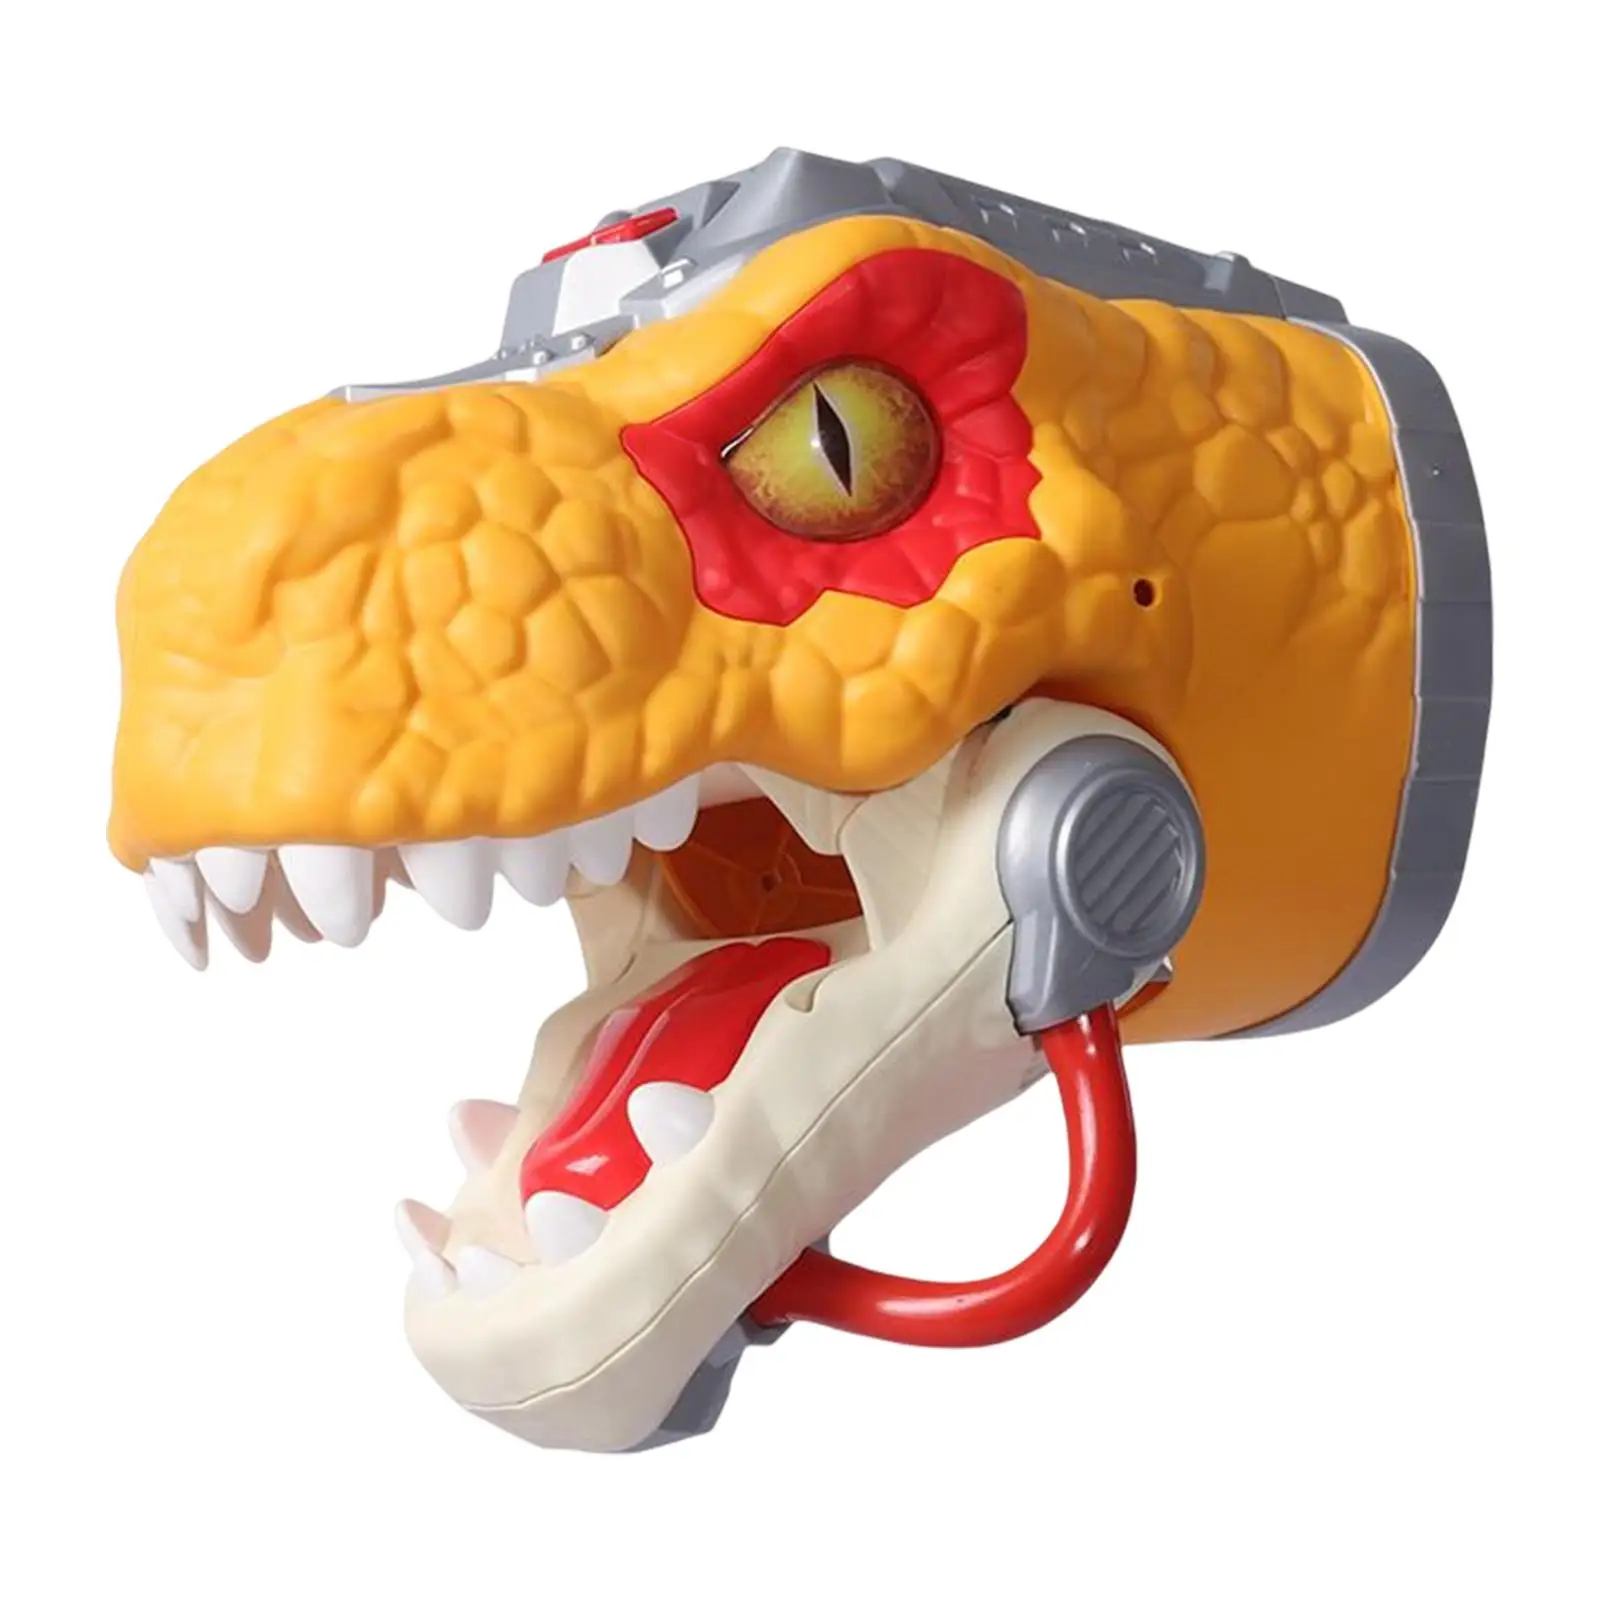 Dinosaur Hand Puppet Dinosaur Toy with Sound and Light Educational Learning Toy for Kids